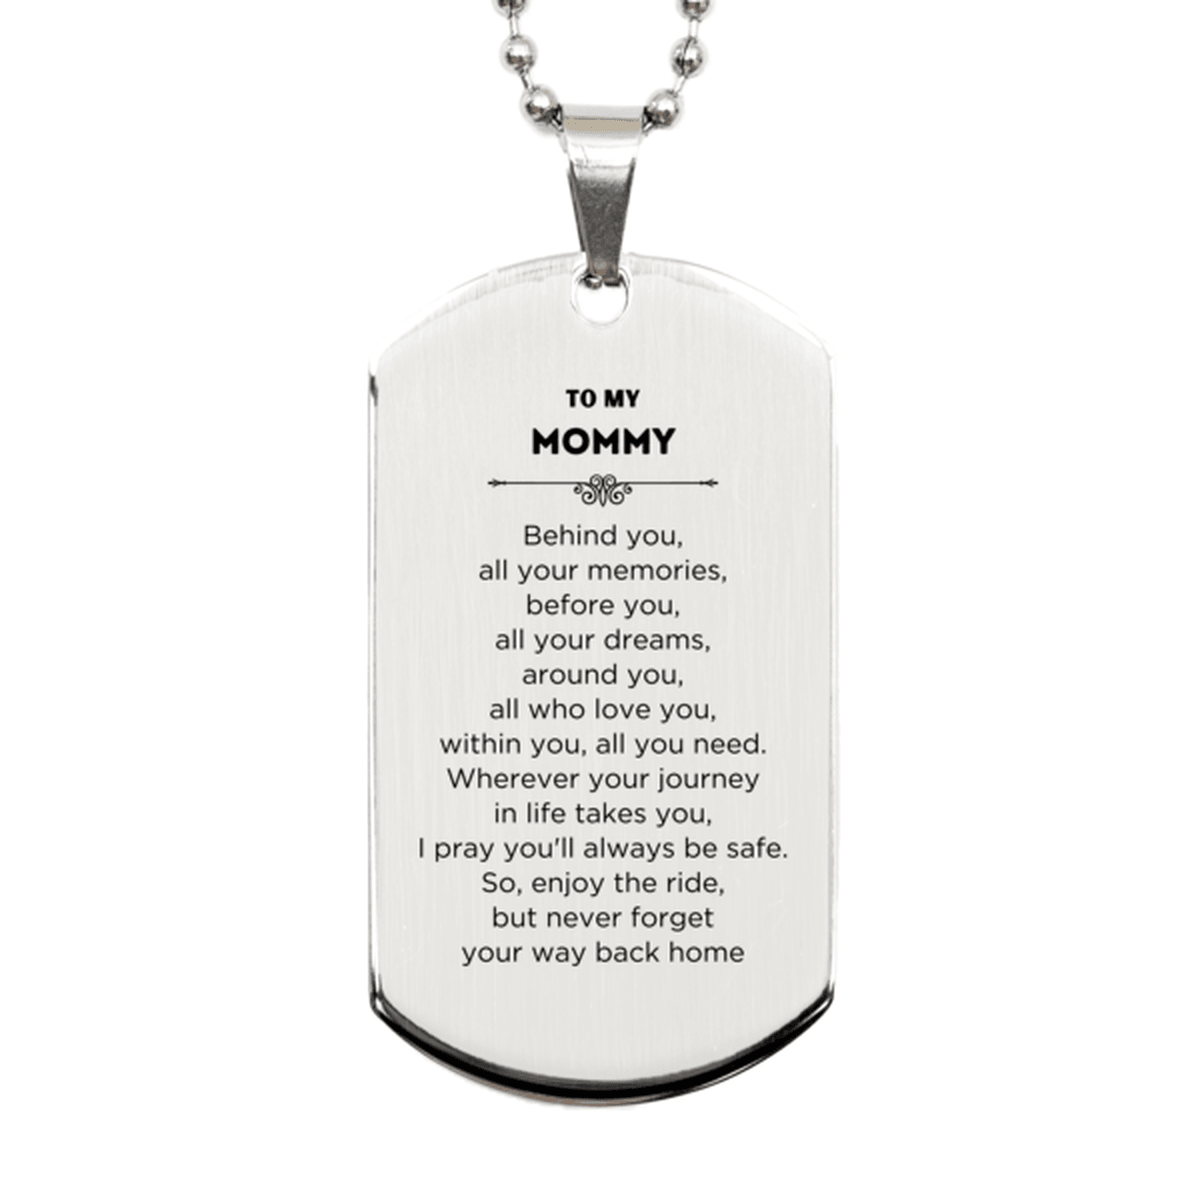 Mommy Silver Dog Tag Necklace Birthday Christmas Unique Gifts Behind you, all your memories, before you, all your dreams - Mallard Moon Gift Shop